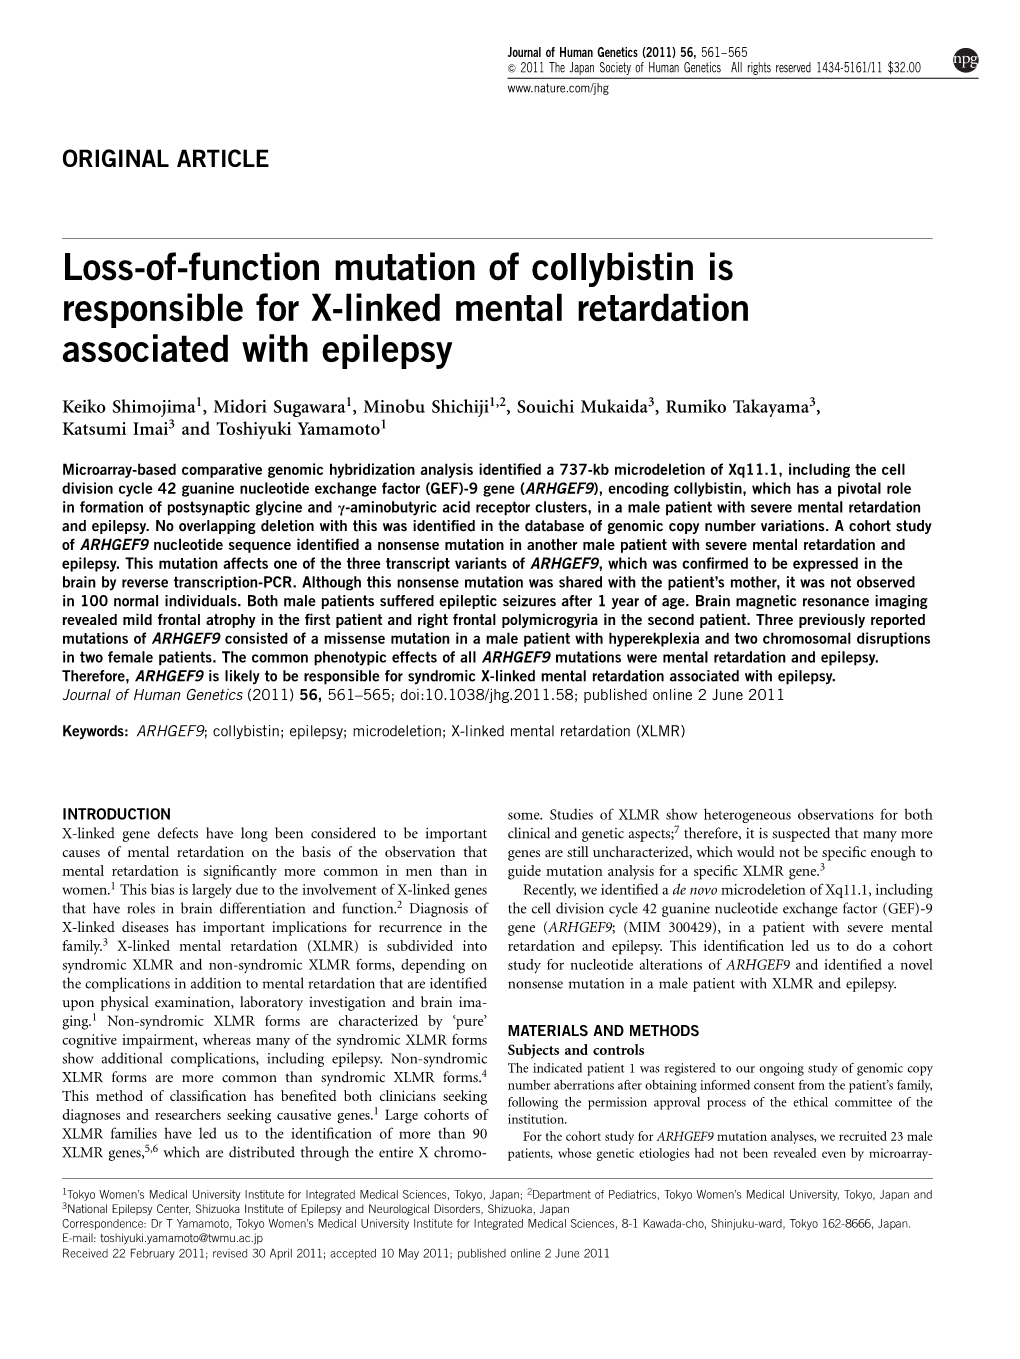 Loss-Of-Function Mutation of Collybistin Is Responsible for X-Linked Mental Retardation Associated with Epilepsy